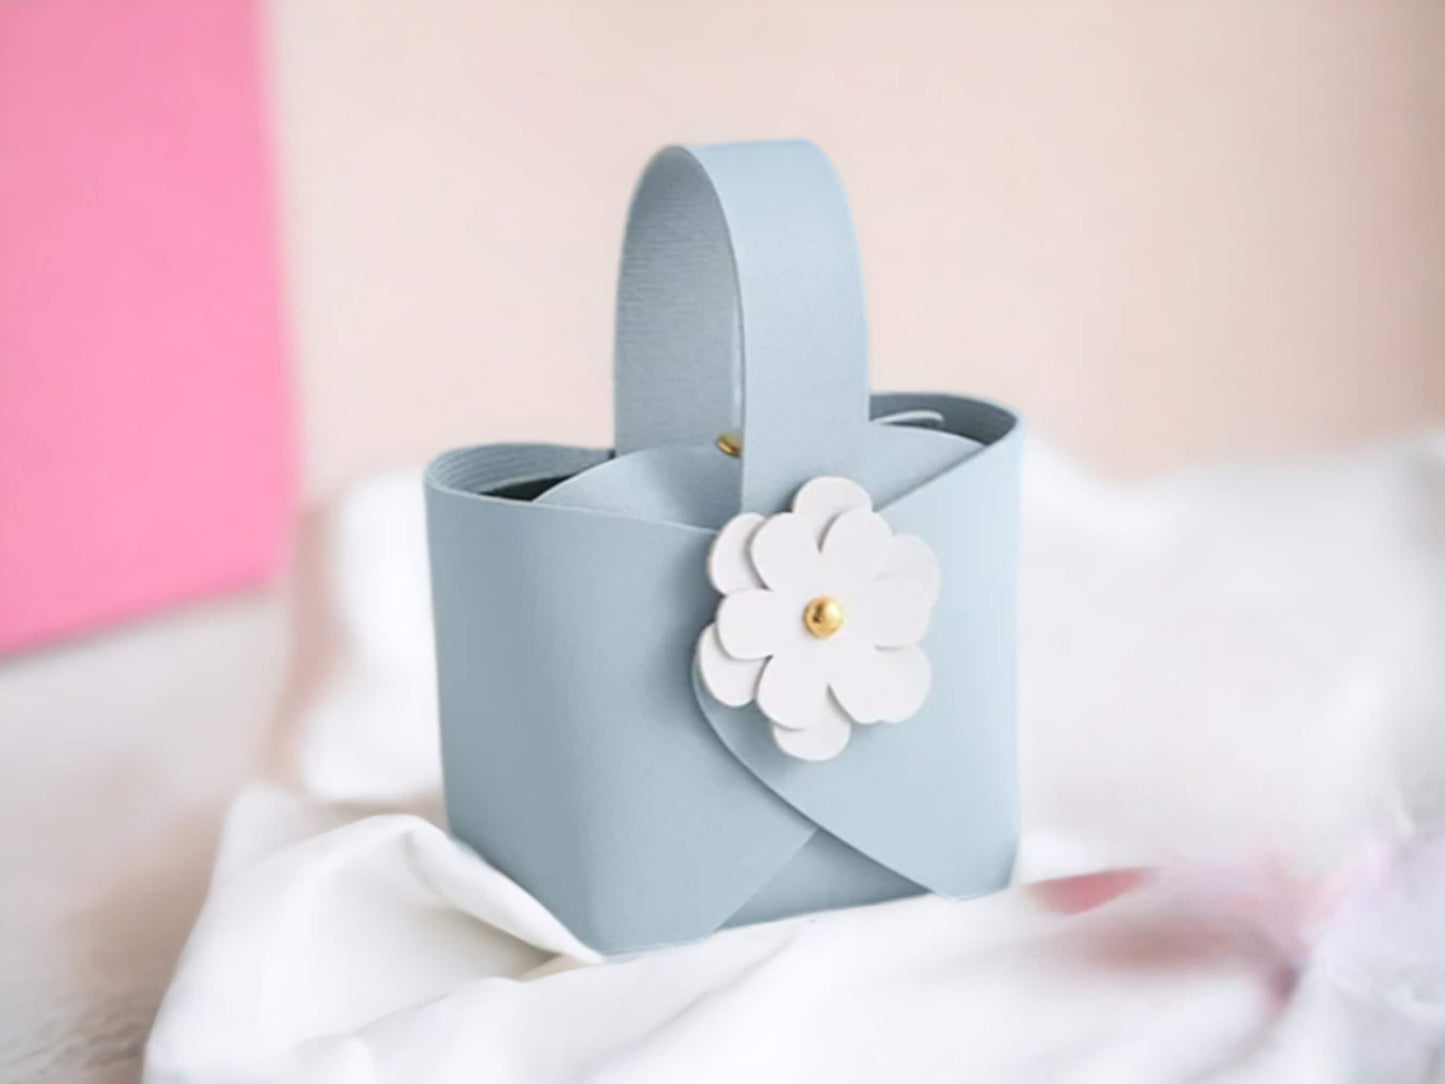 5 pcs Leather Wedding Favors Bags With Flower